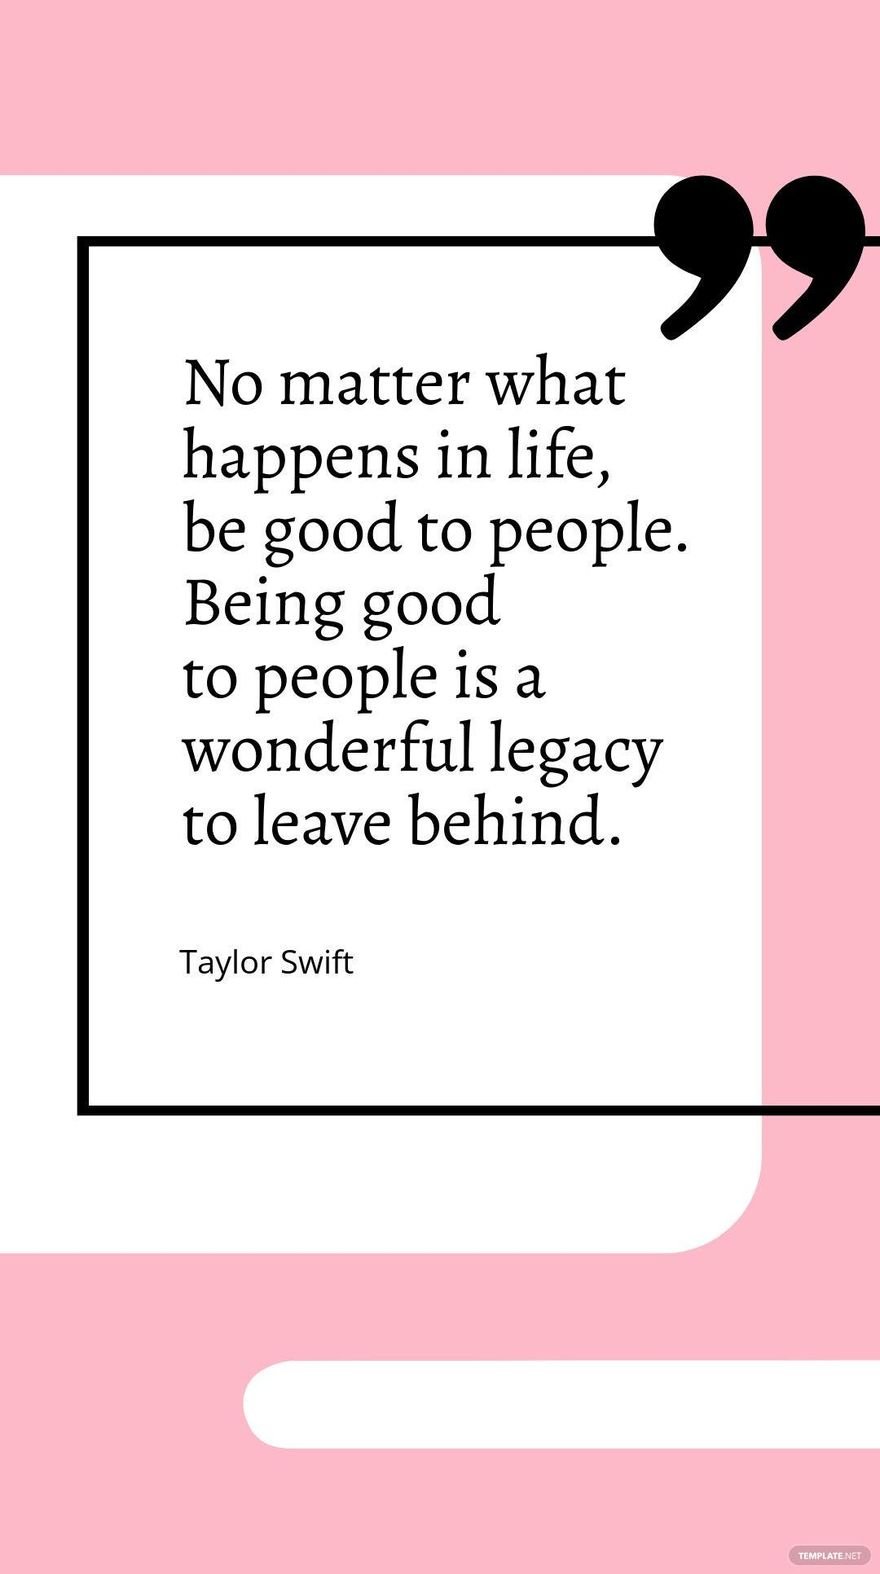 Taylor Swift - No matter what happens in life, be good to people. Being good to people is a wonderful legacy to leave behind.